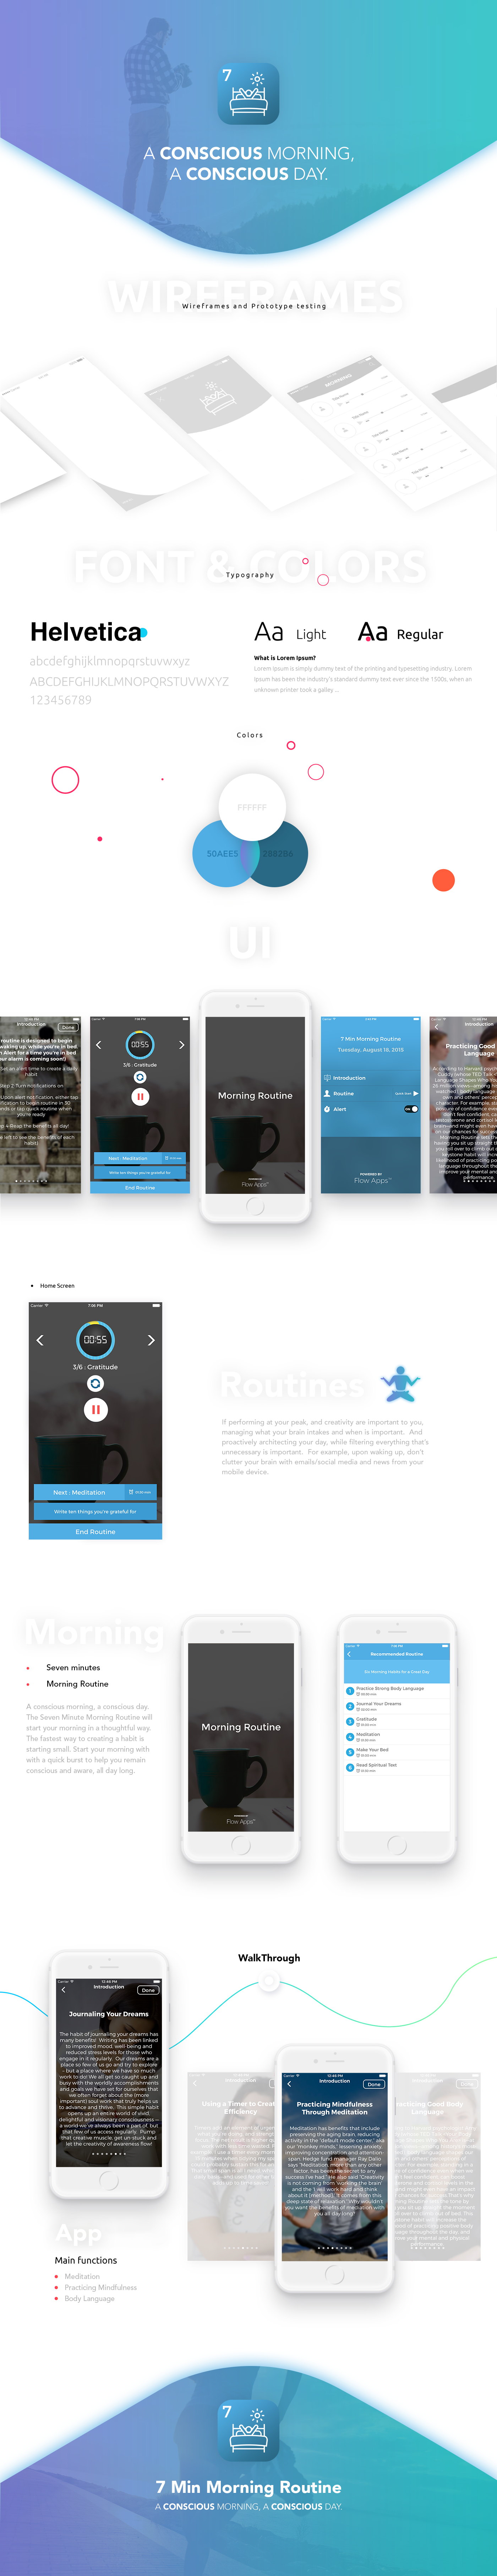 fitness app UI ux UX design Morning Routine App app design iphone app flat design Mobile app user interface